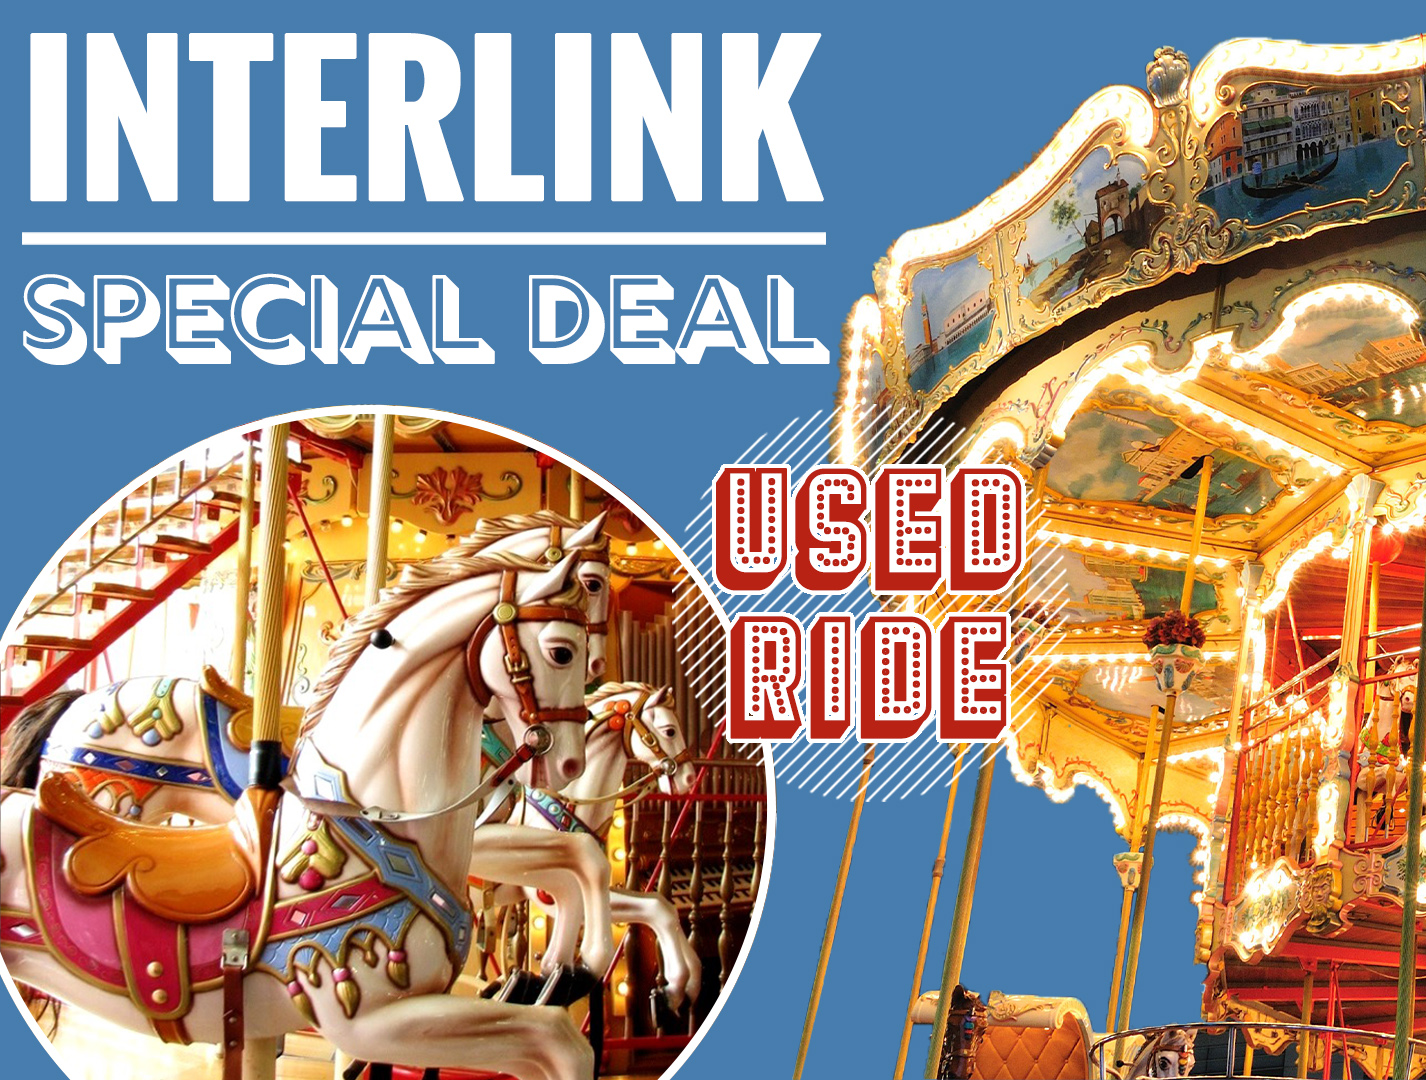 Interlink Used Ride : Special Deal Carousel